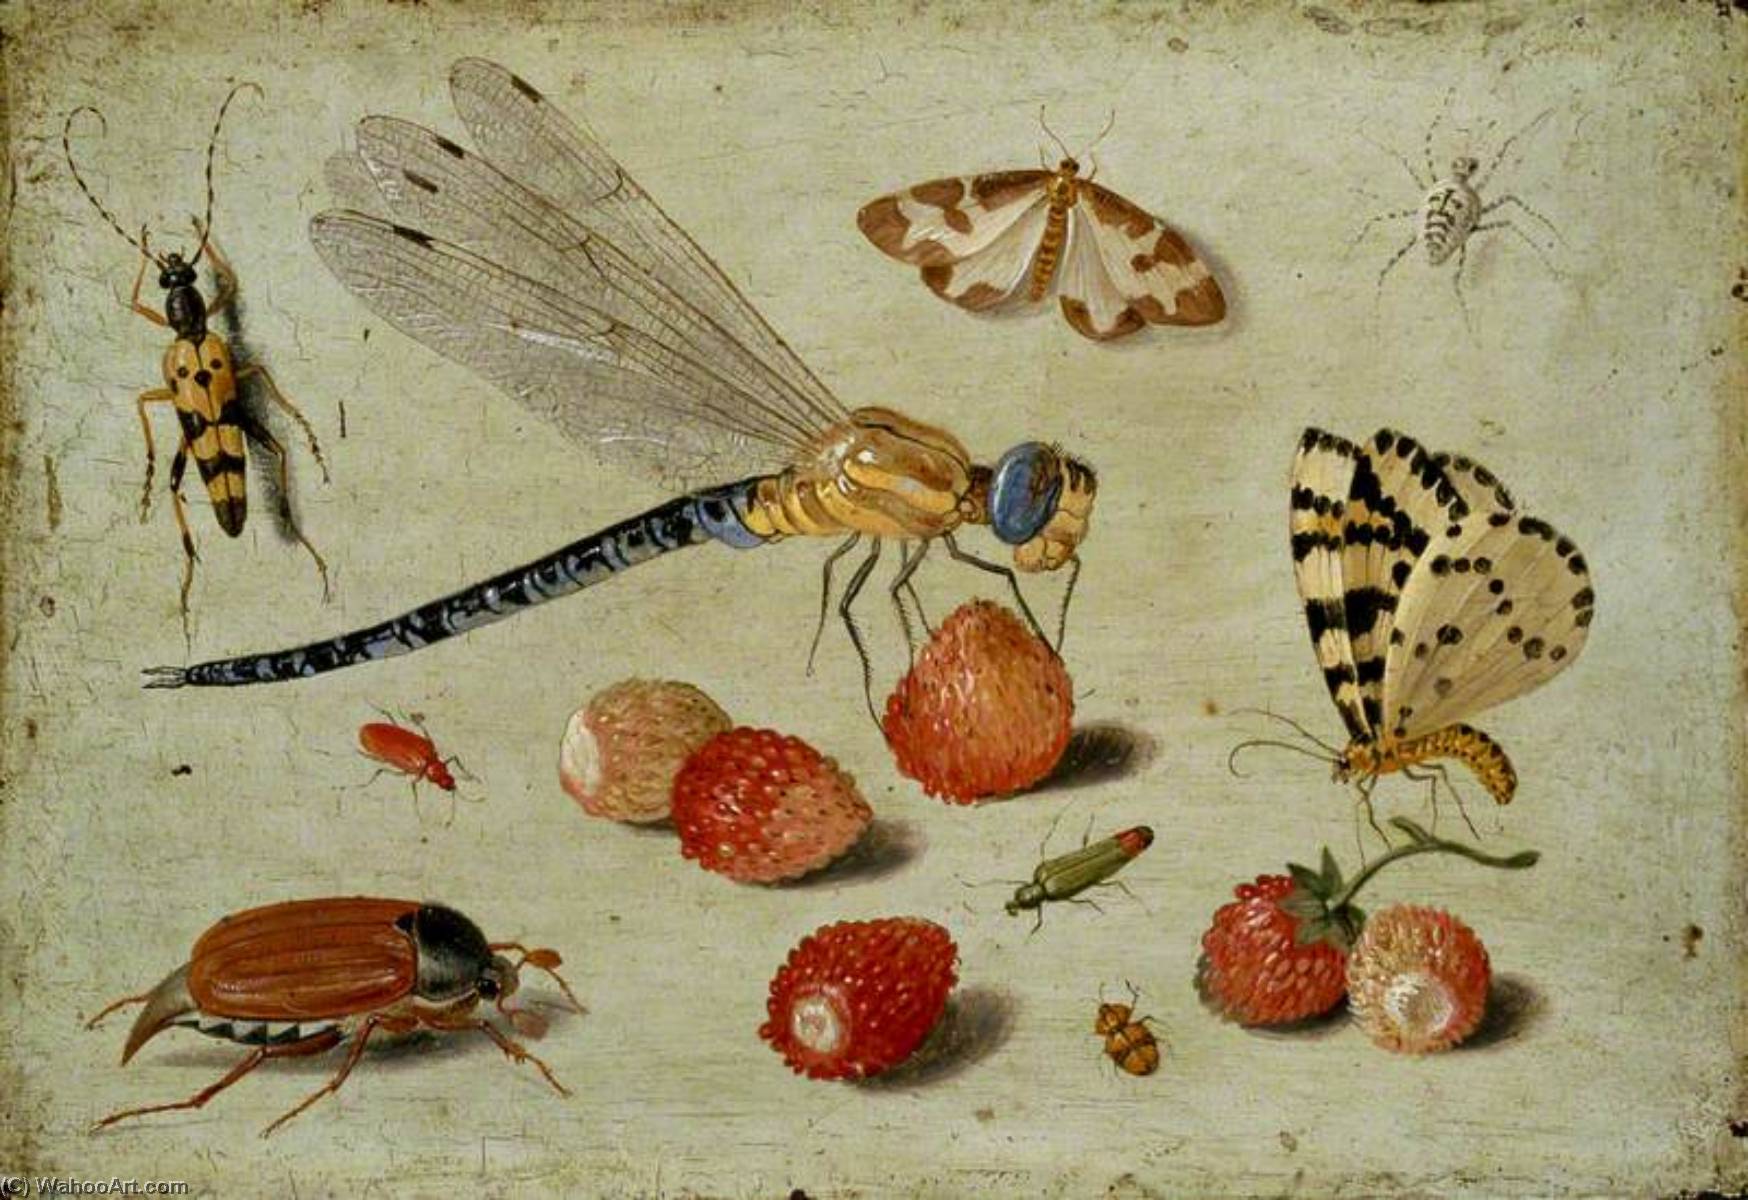 WikiOO.org - Encyclopedia of Fine Arts - Lukisan, Artwork Jan Van Kessel The Elder - A Dragon fly, two Moths, a Spider and some Beetles, with wild Strawberries